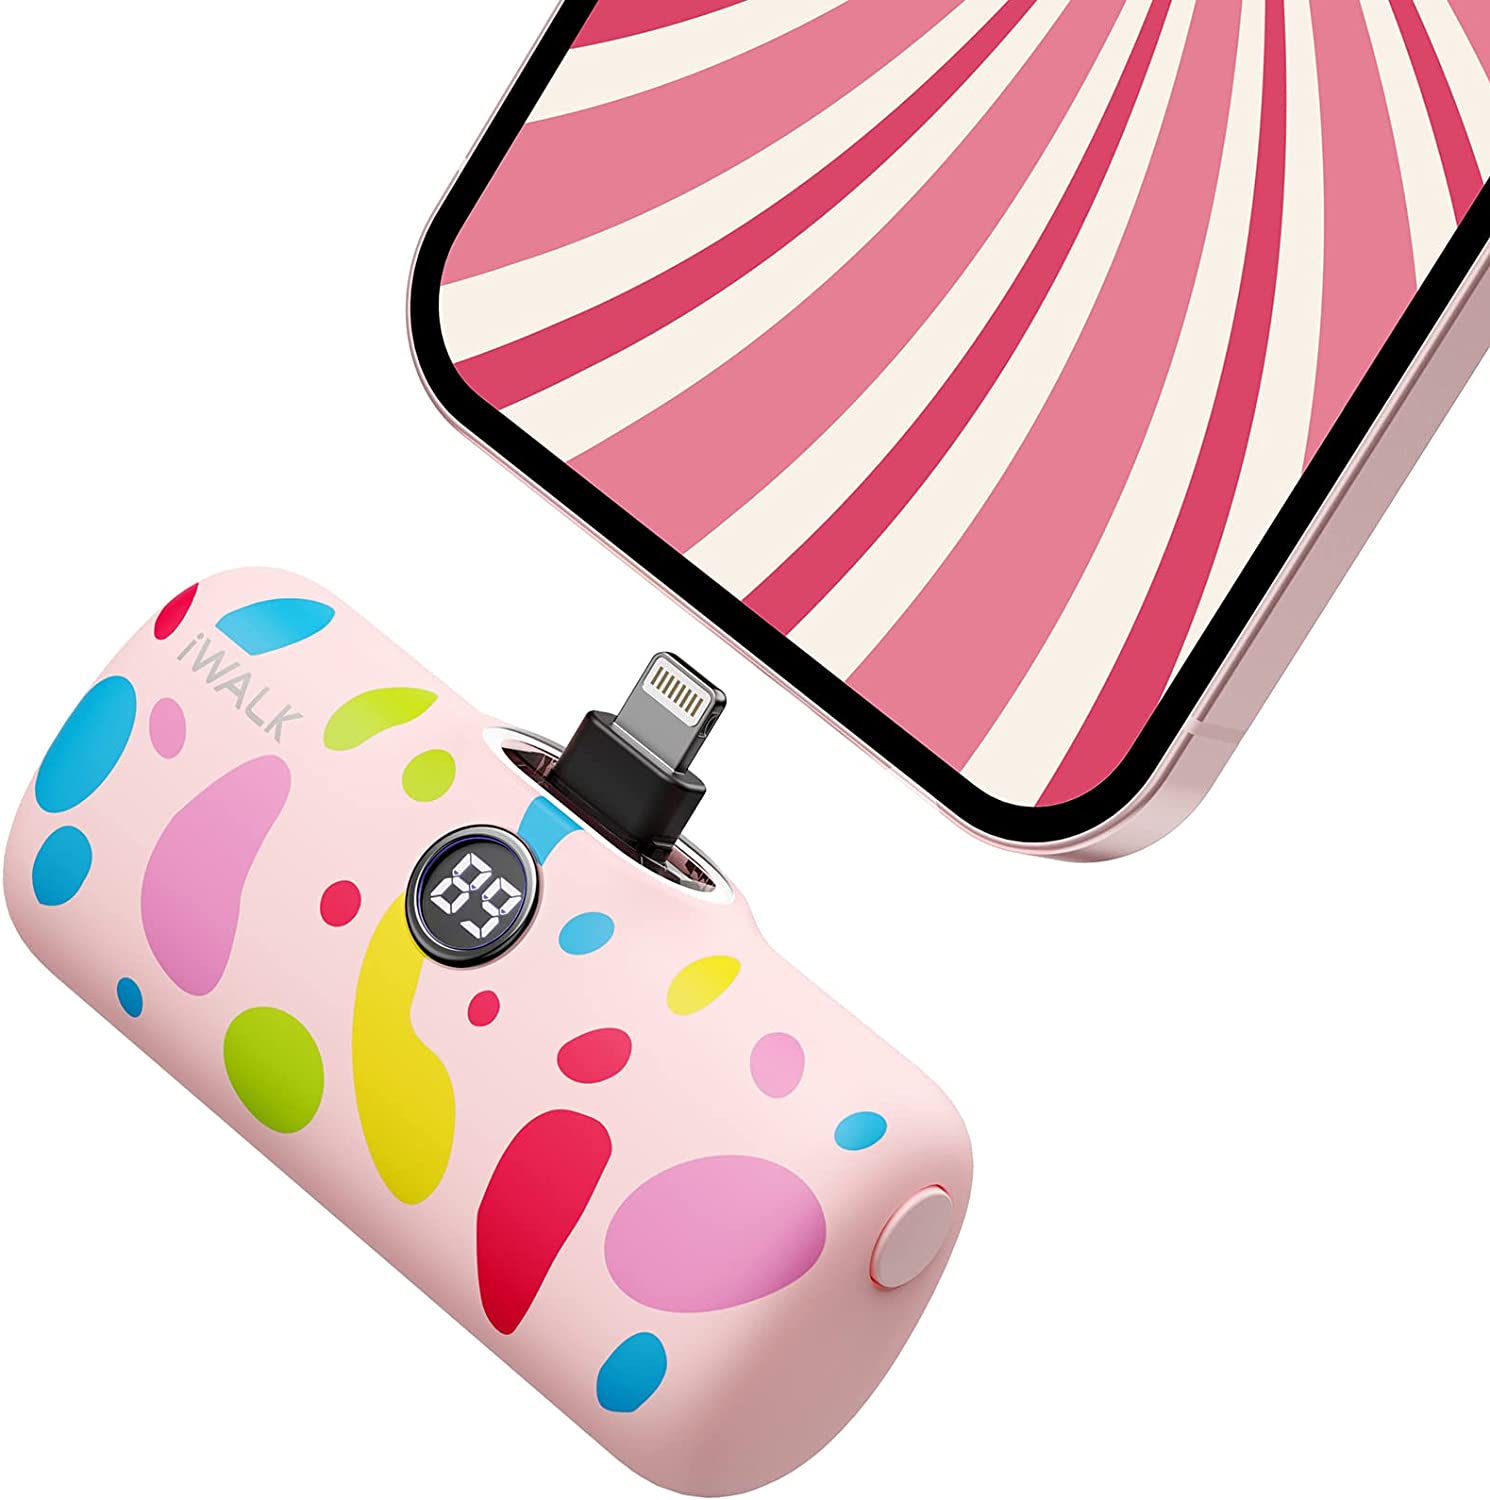 iWalk Linkme Pro Fast Charge 4800mAh Pocket Battery With Battery Display For iPhone - Pink Bubble Pattern